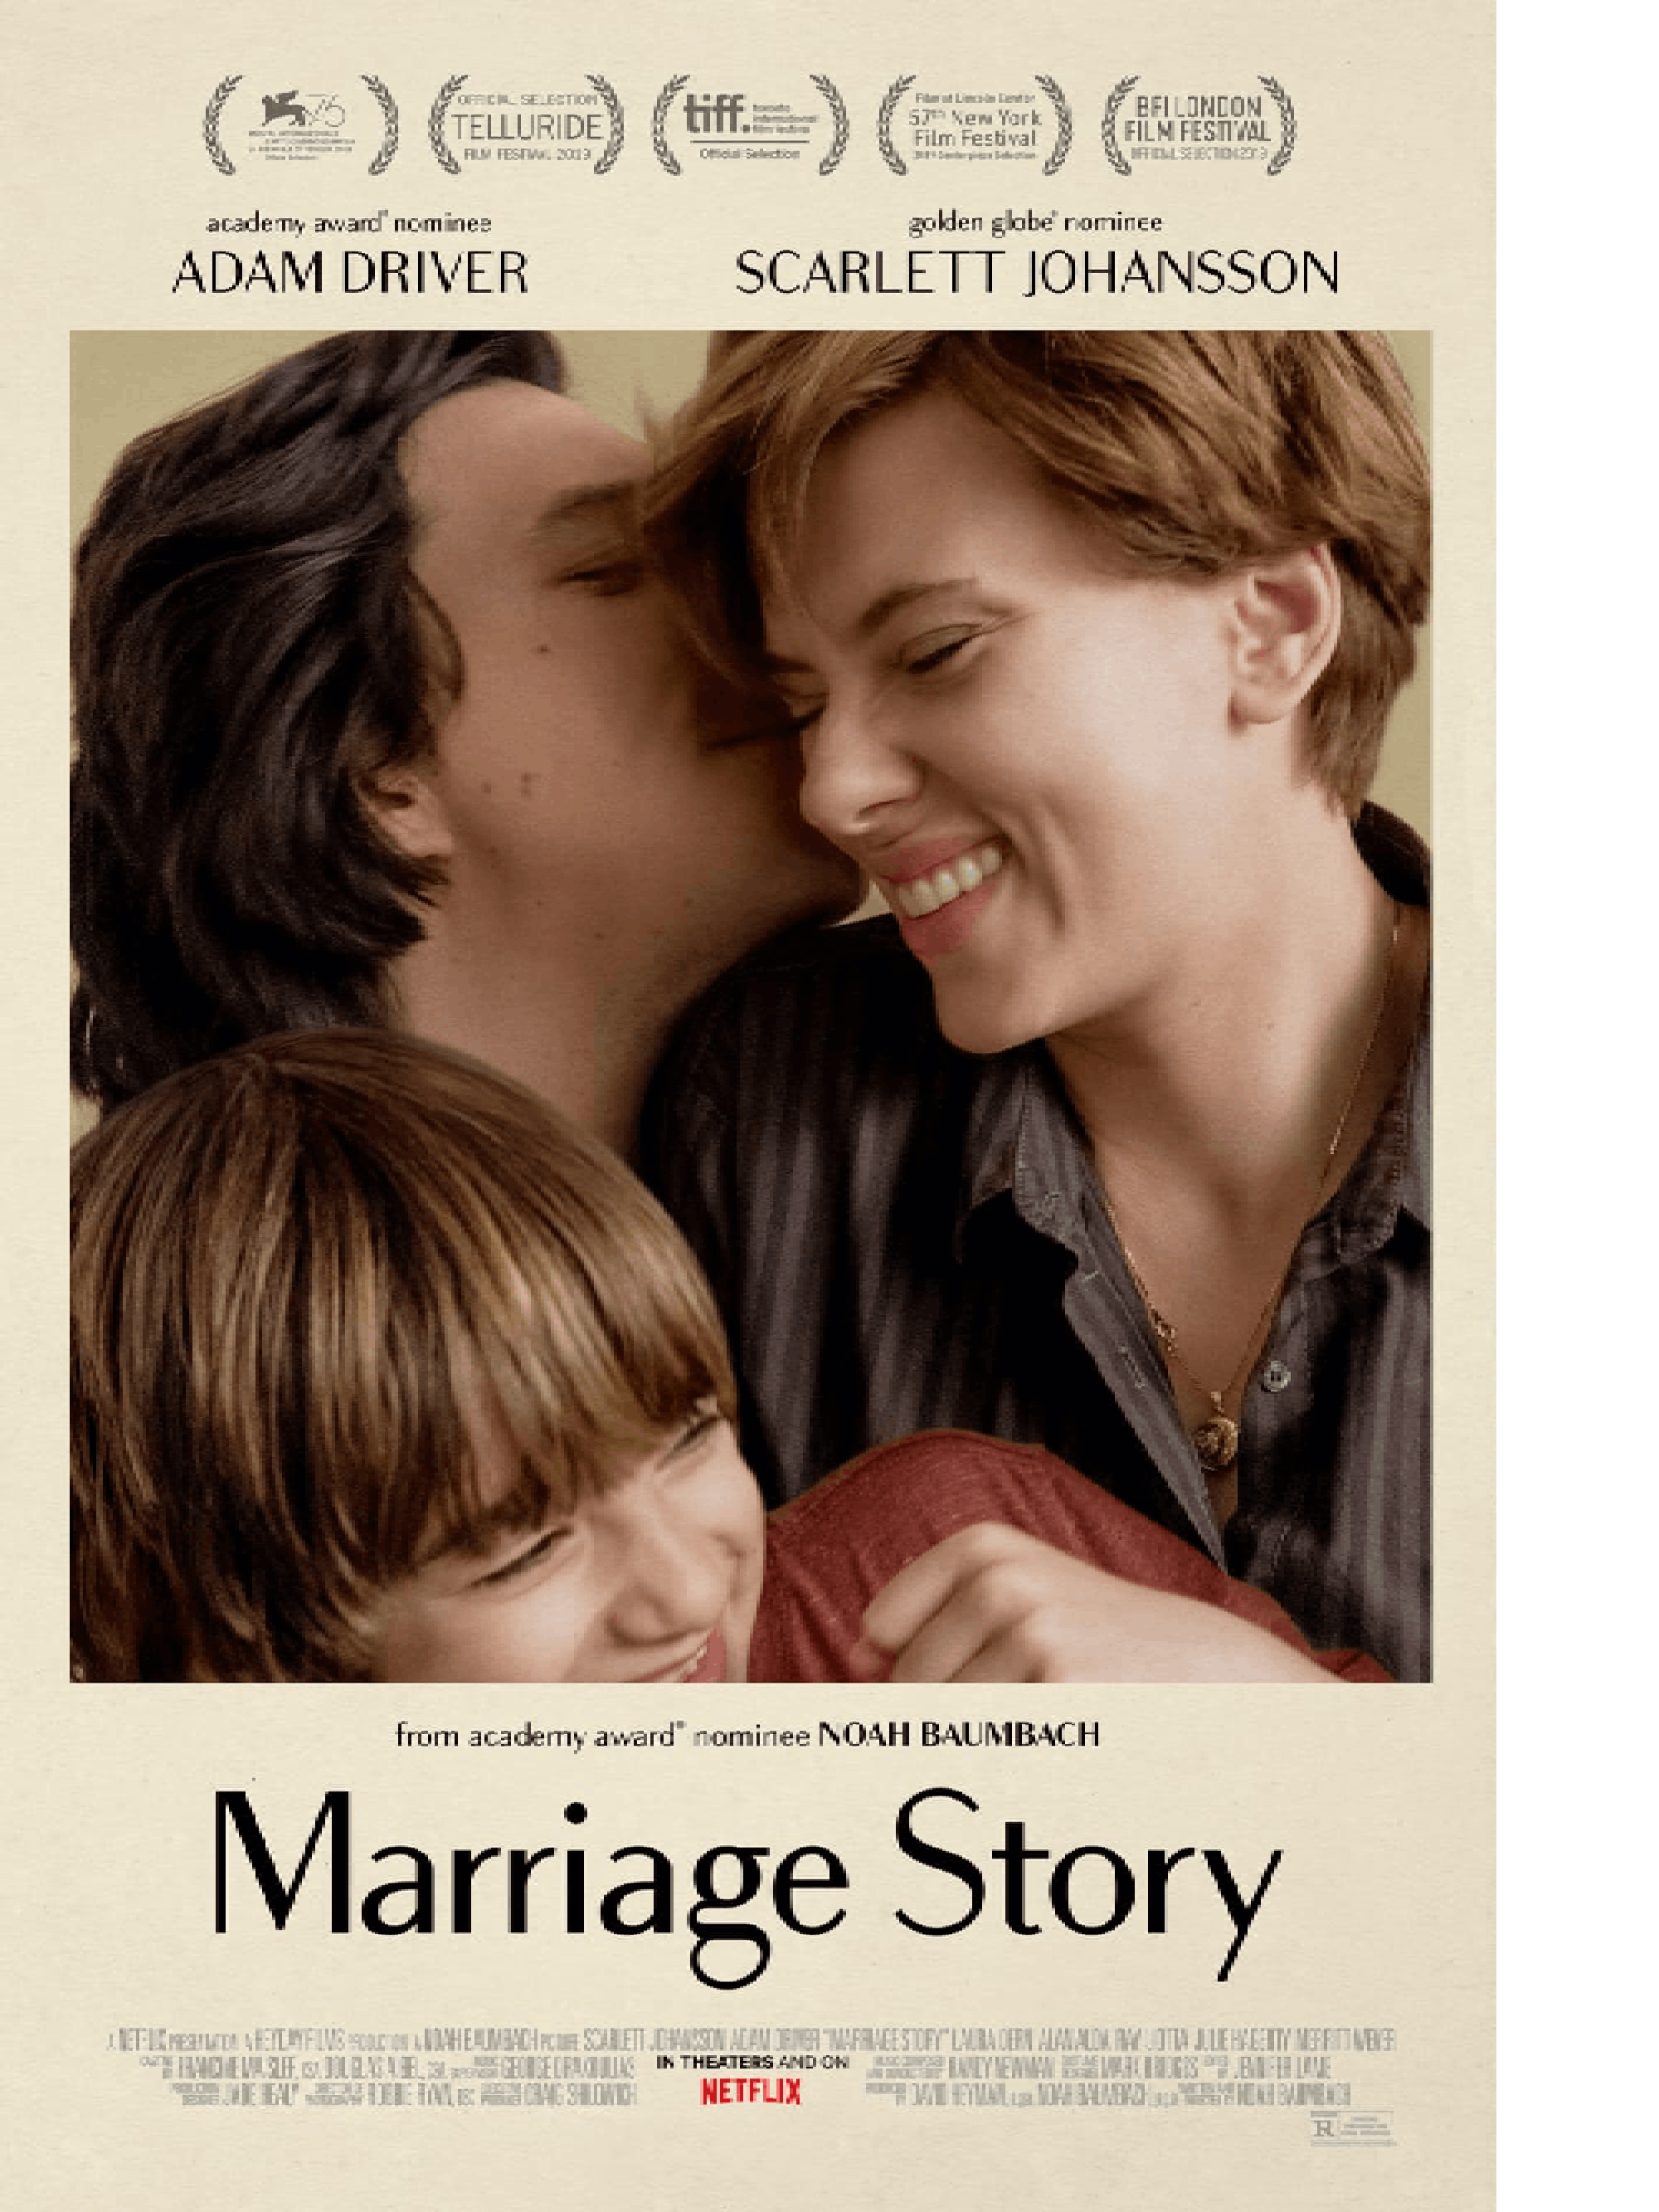 The key art for Netflix’s Marriage Story. The poster shows the two main characters and their son in an embrace. The actors names, awards won, title and other information line the image in black text.